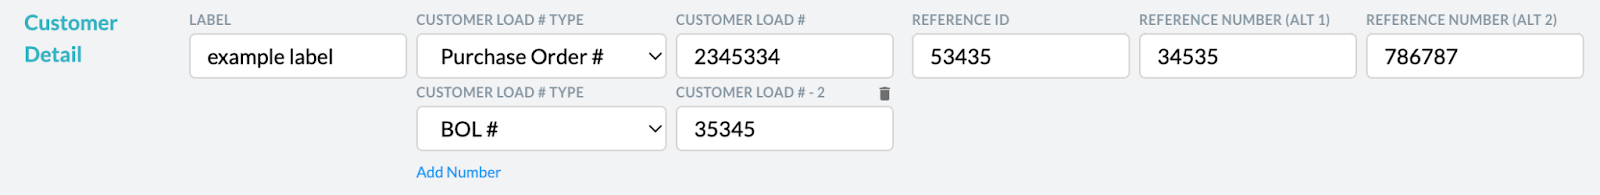 create a new load entry 2 ctms.png